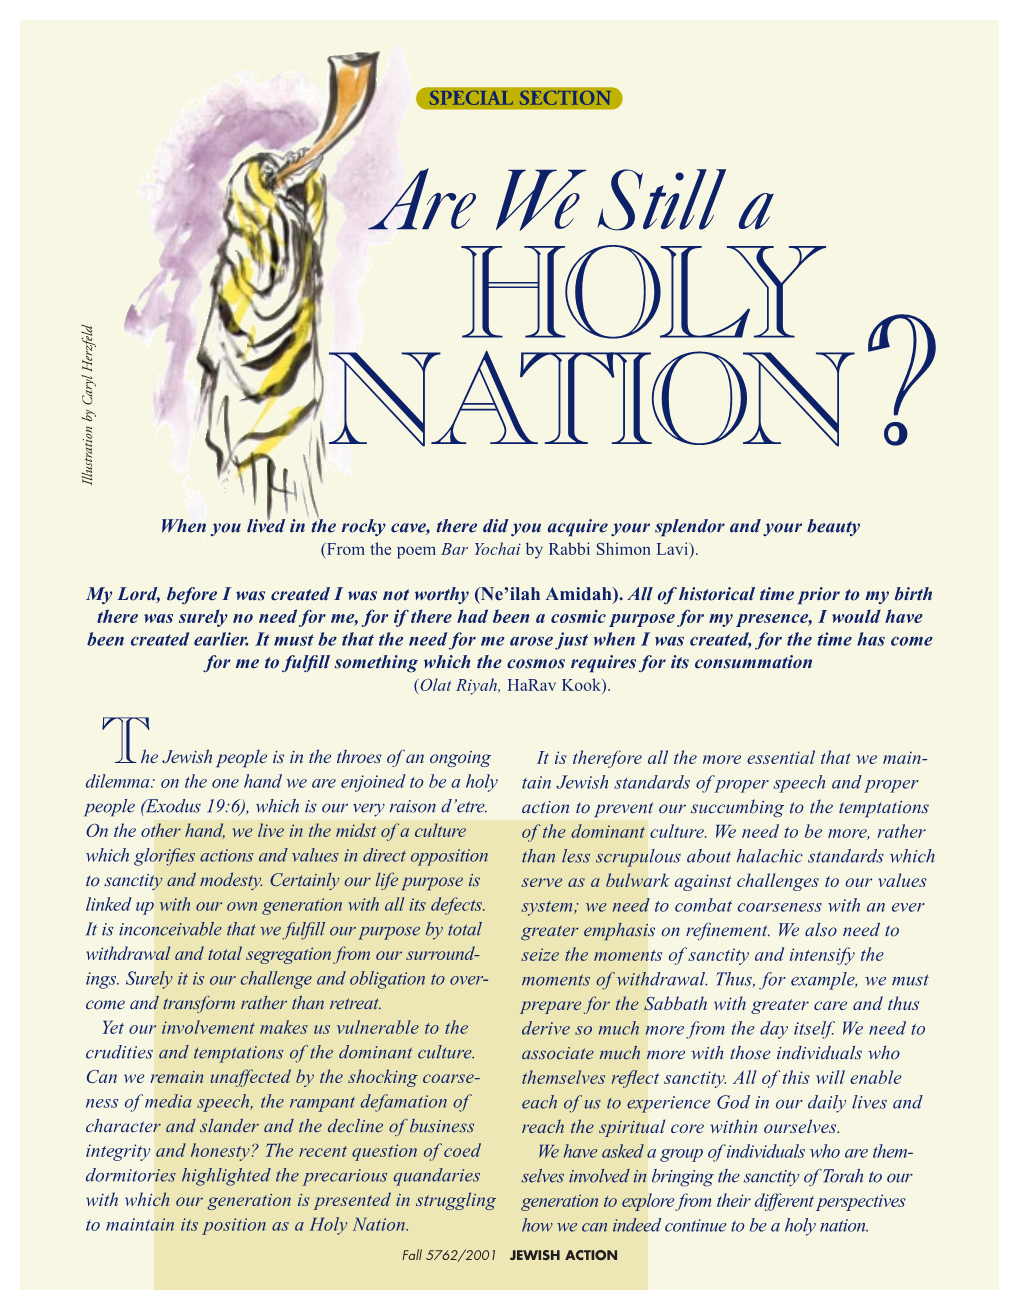 Holy Nation Articles